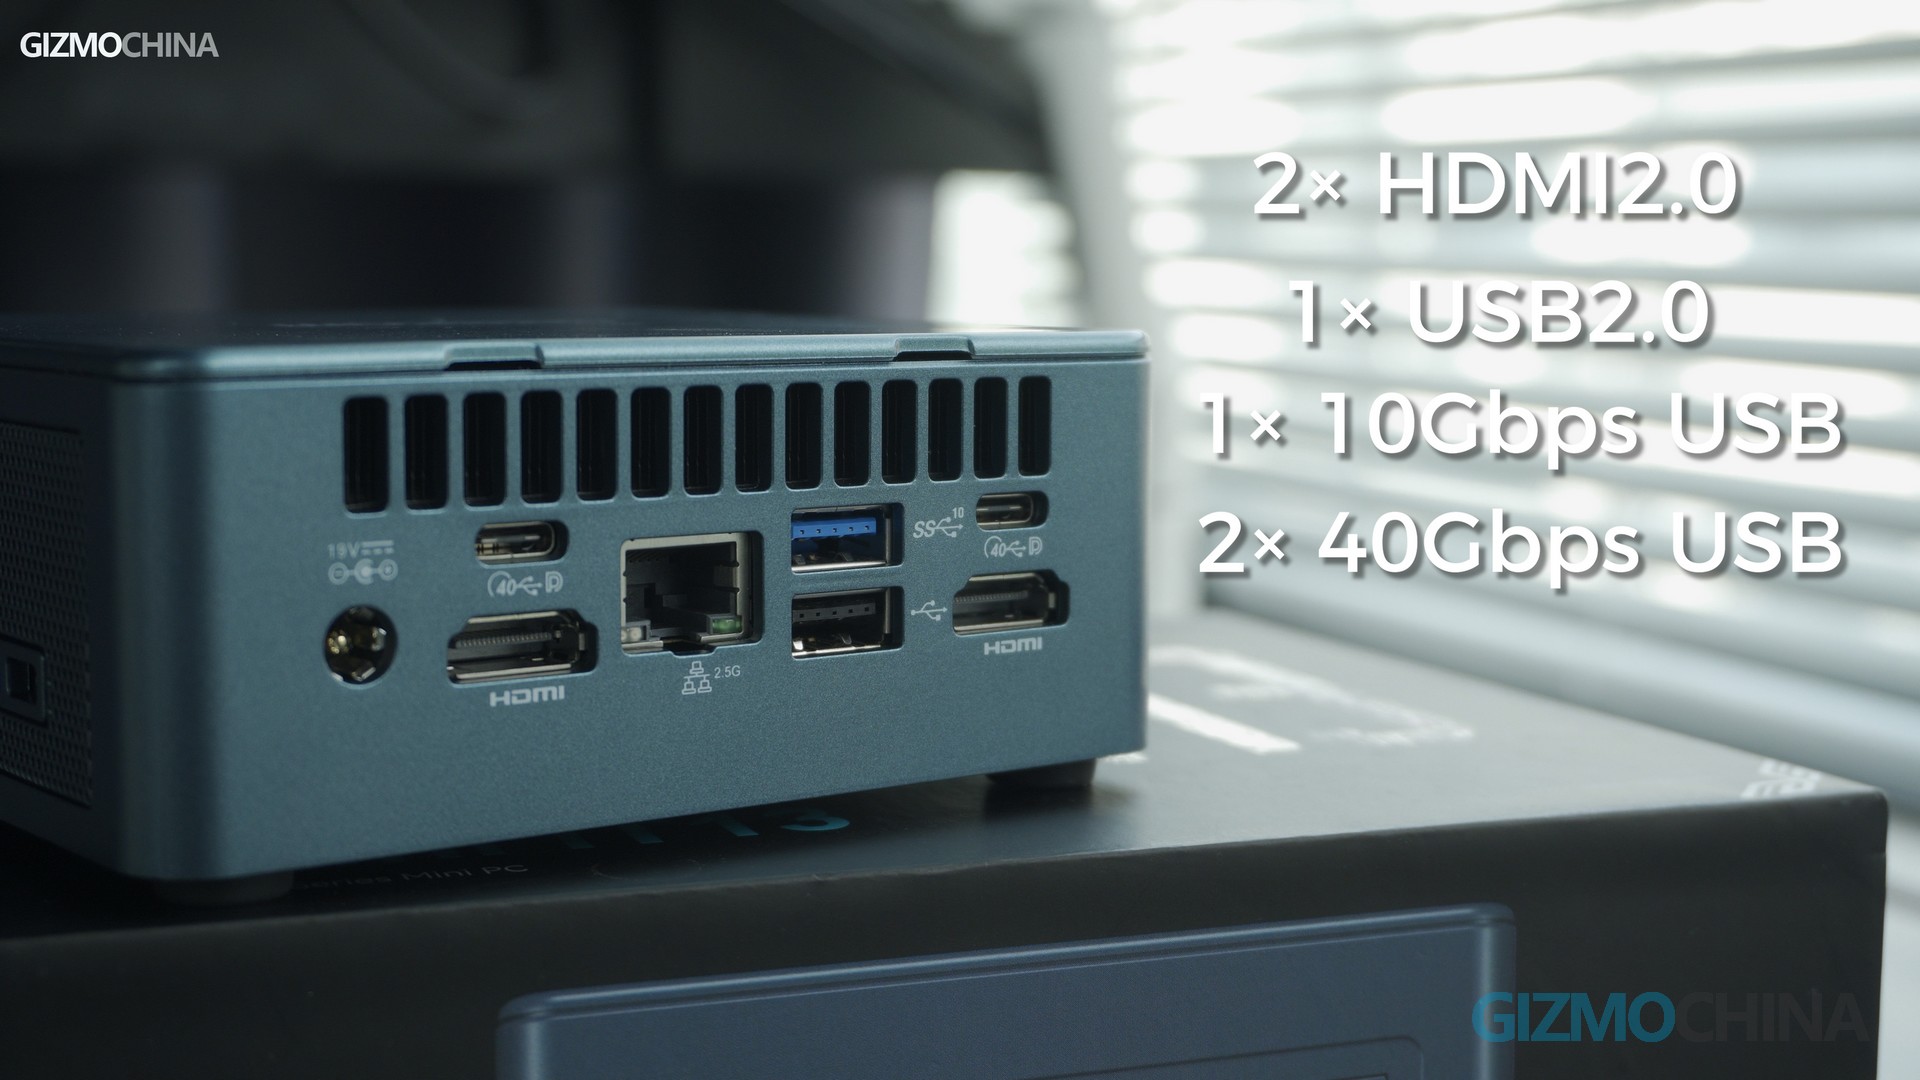 GEEKOM IT13 Mini PC Review - A $789 USD Tiny PC with an Intel Core